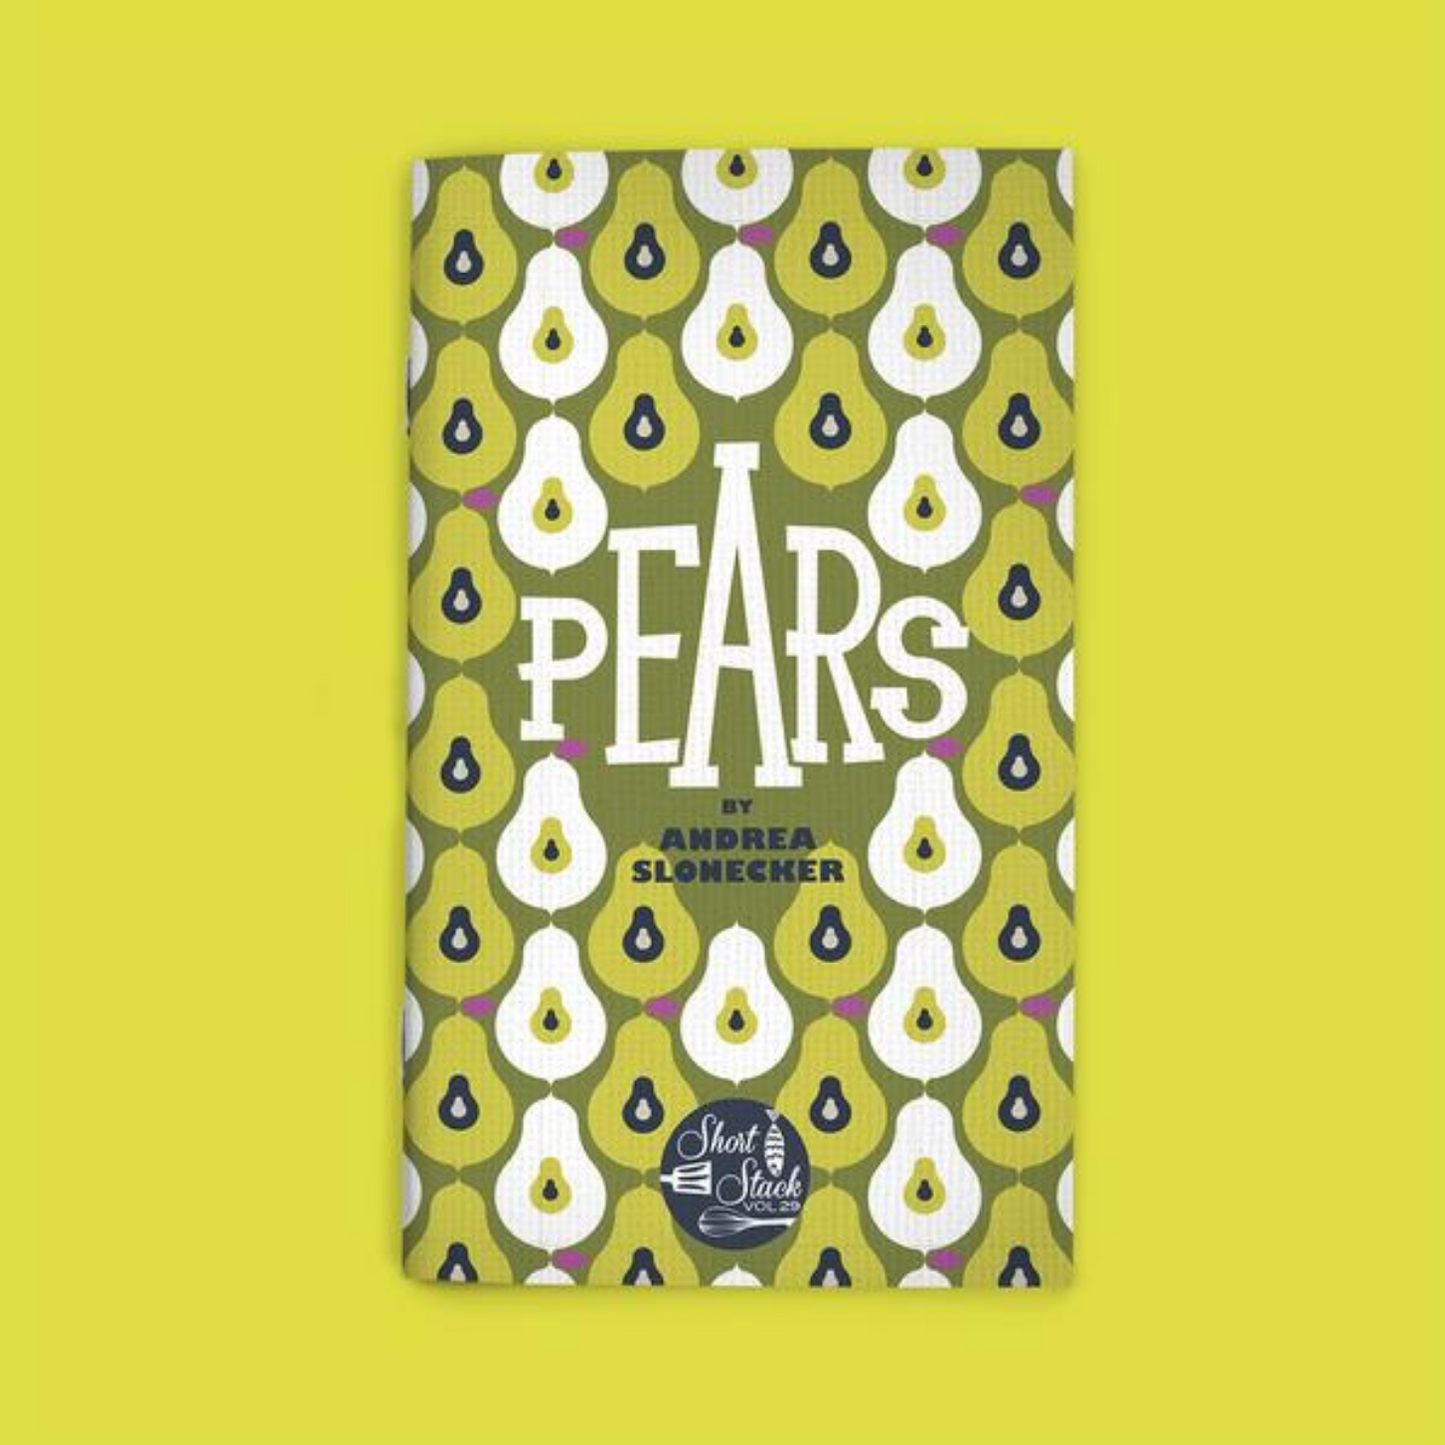 "Pears" Short Stack Vol. 29